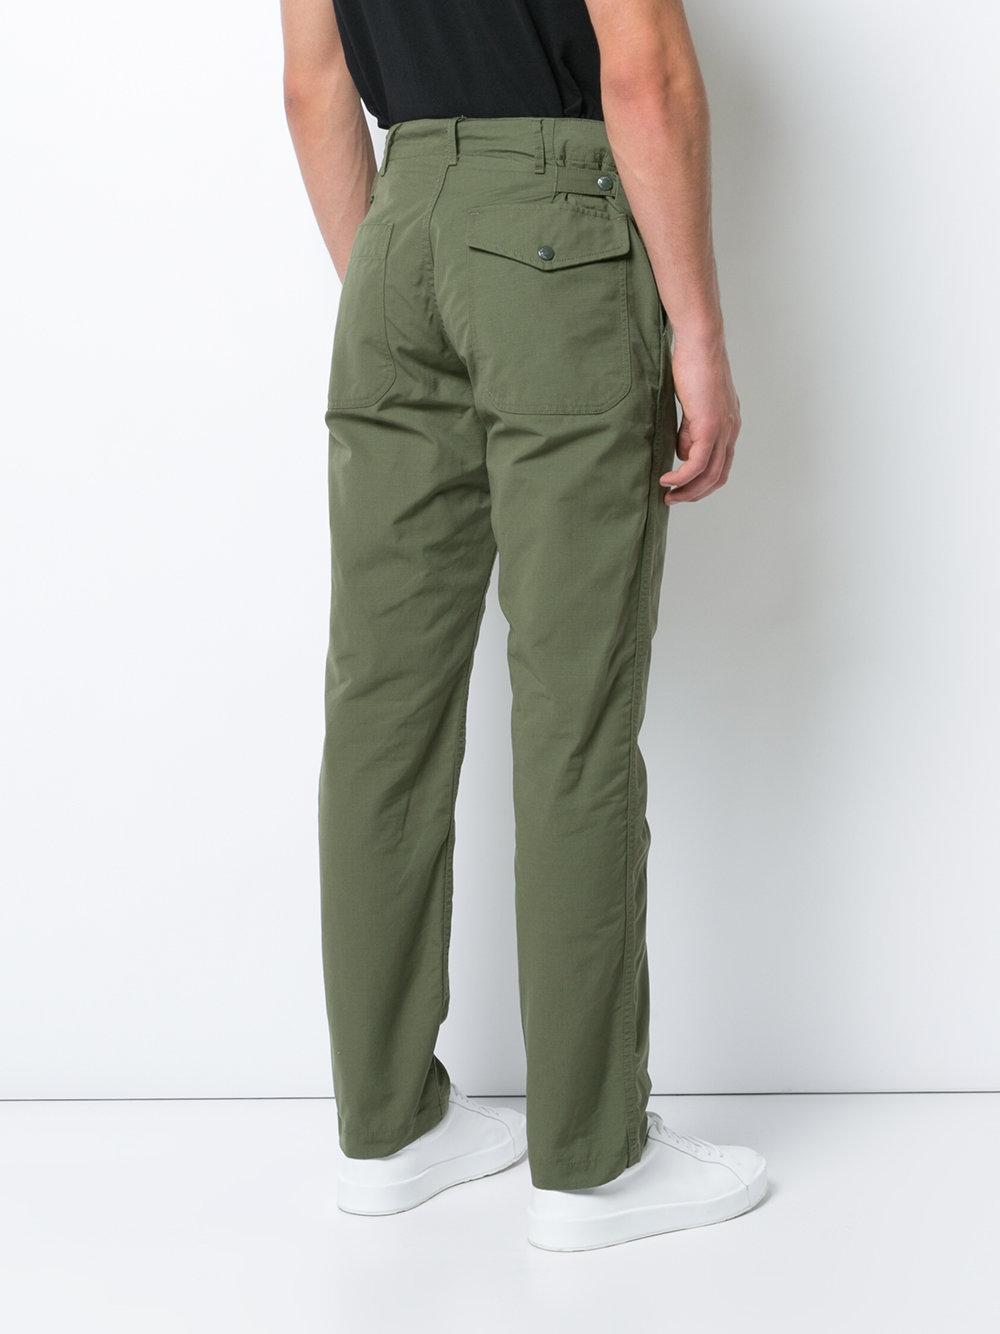 Lyst - Engineered Garments Straight Trousers in Green for Men